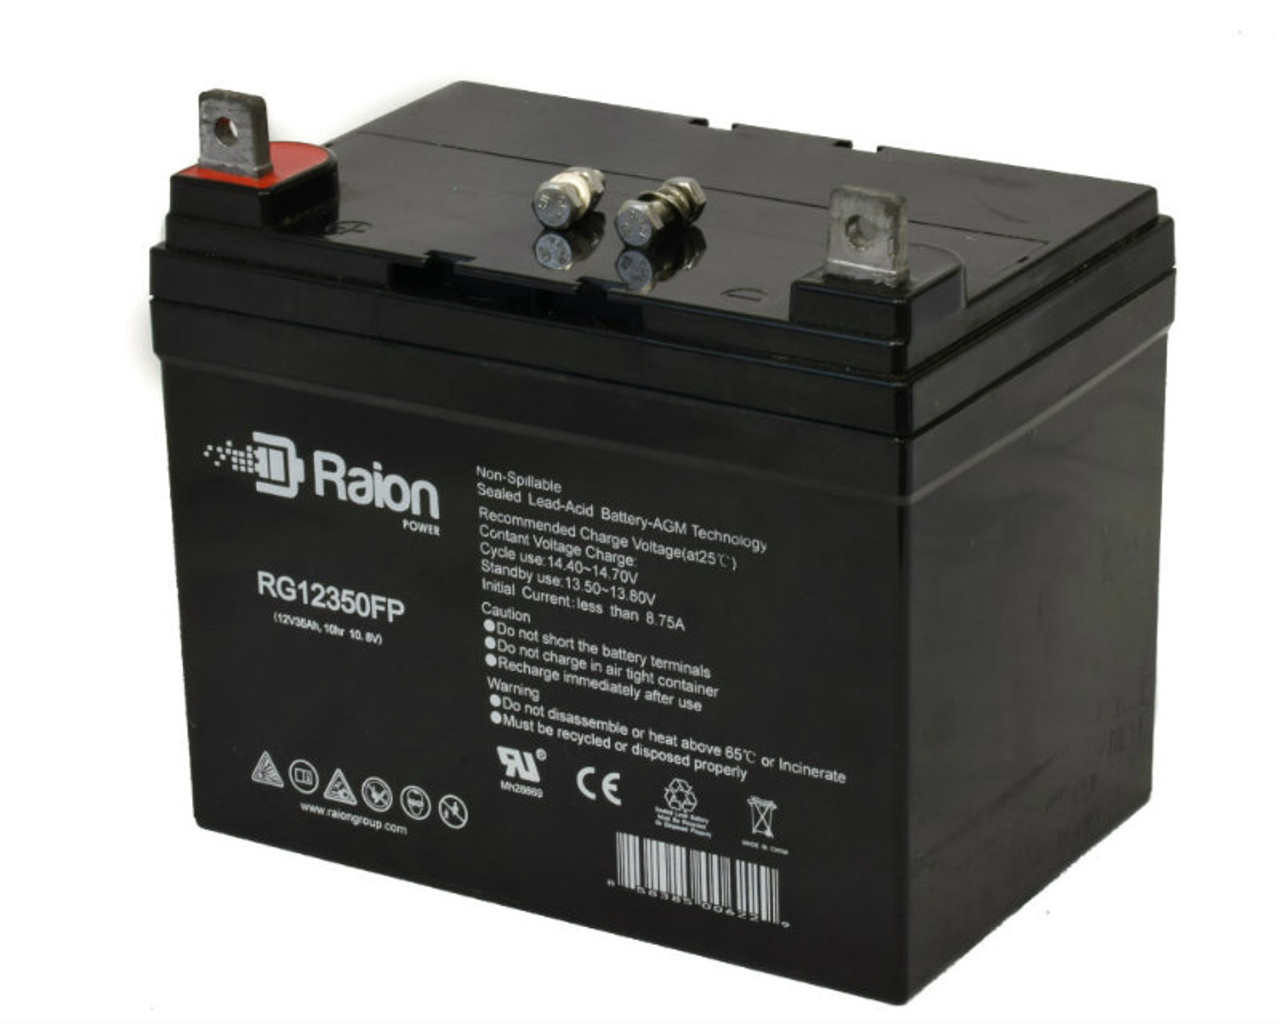 Raion Power Replacement 12V 35Ah RG12350FP Battery for Great Dane CHARIOT JR LINE